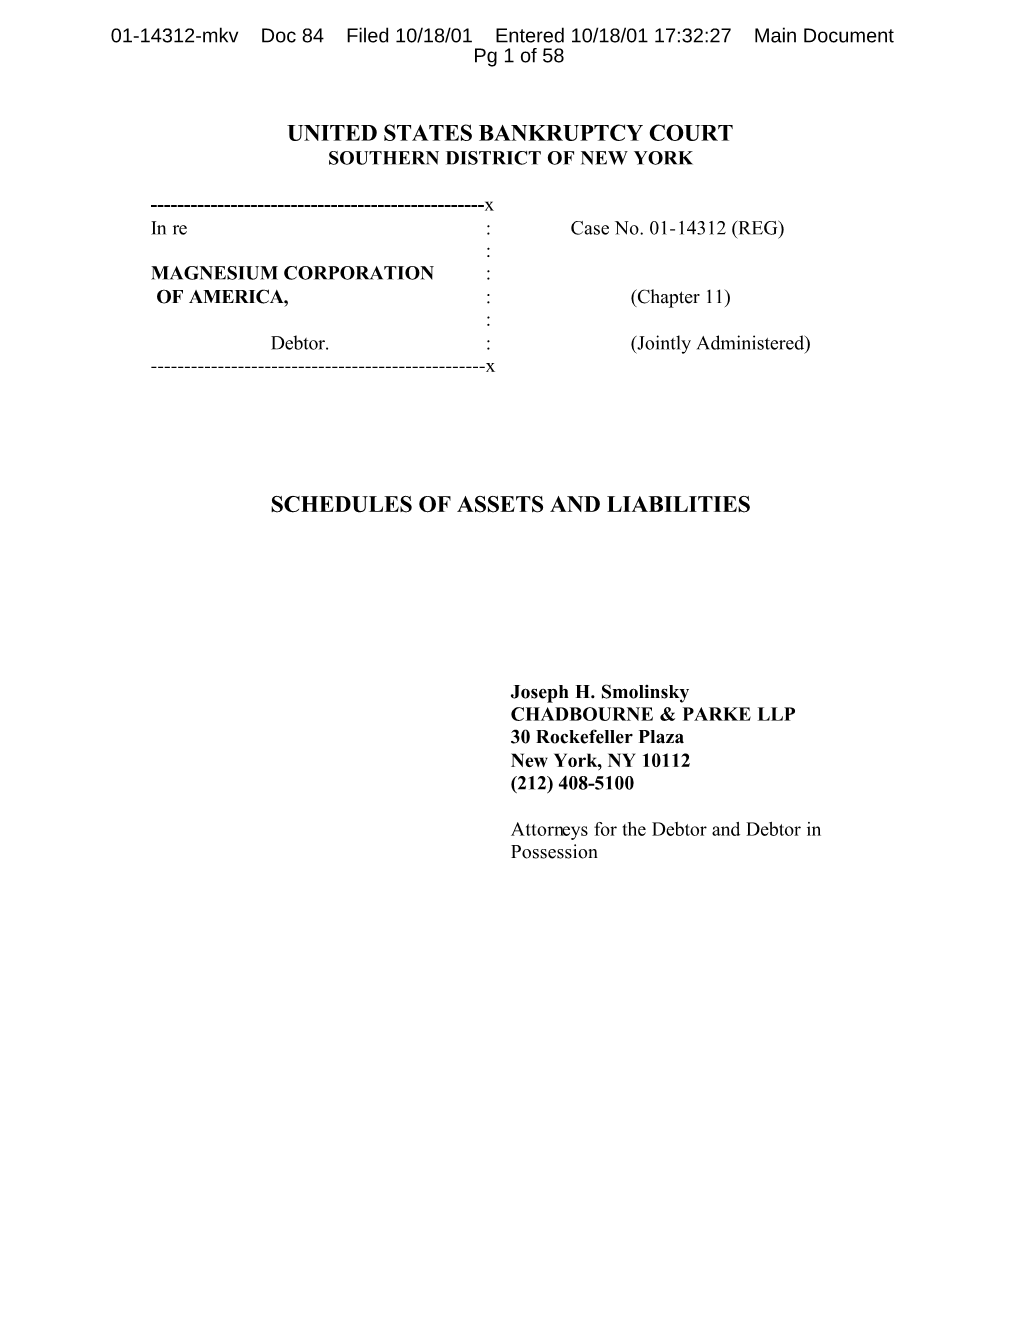 United States Bankruptcy Court Schedules of Assets